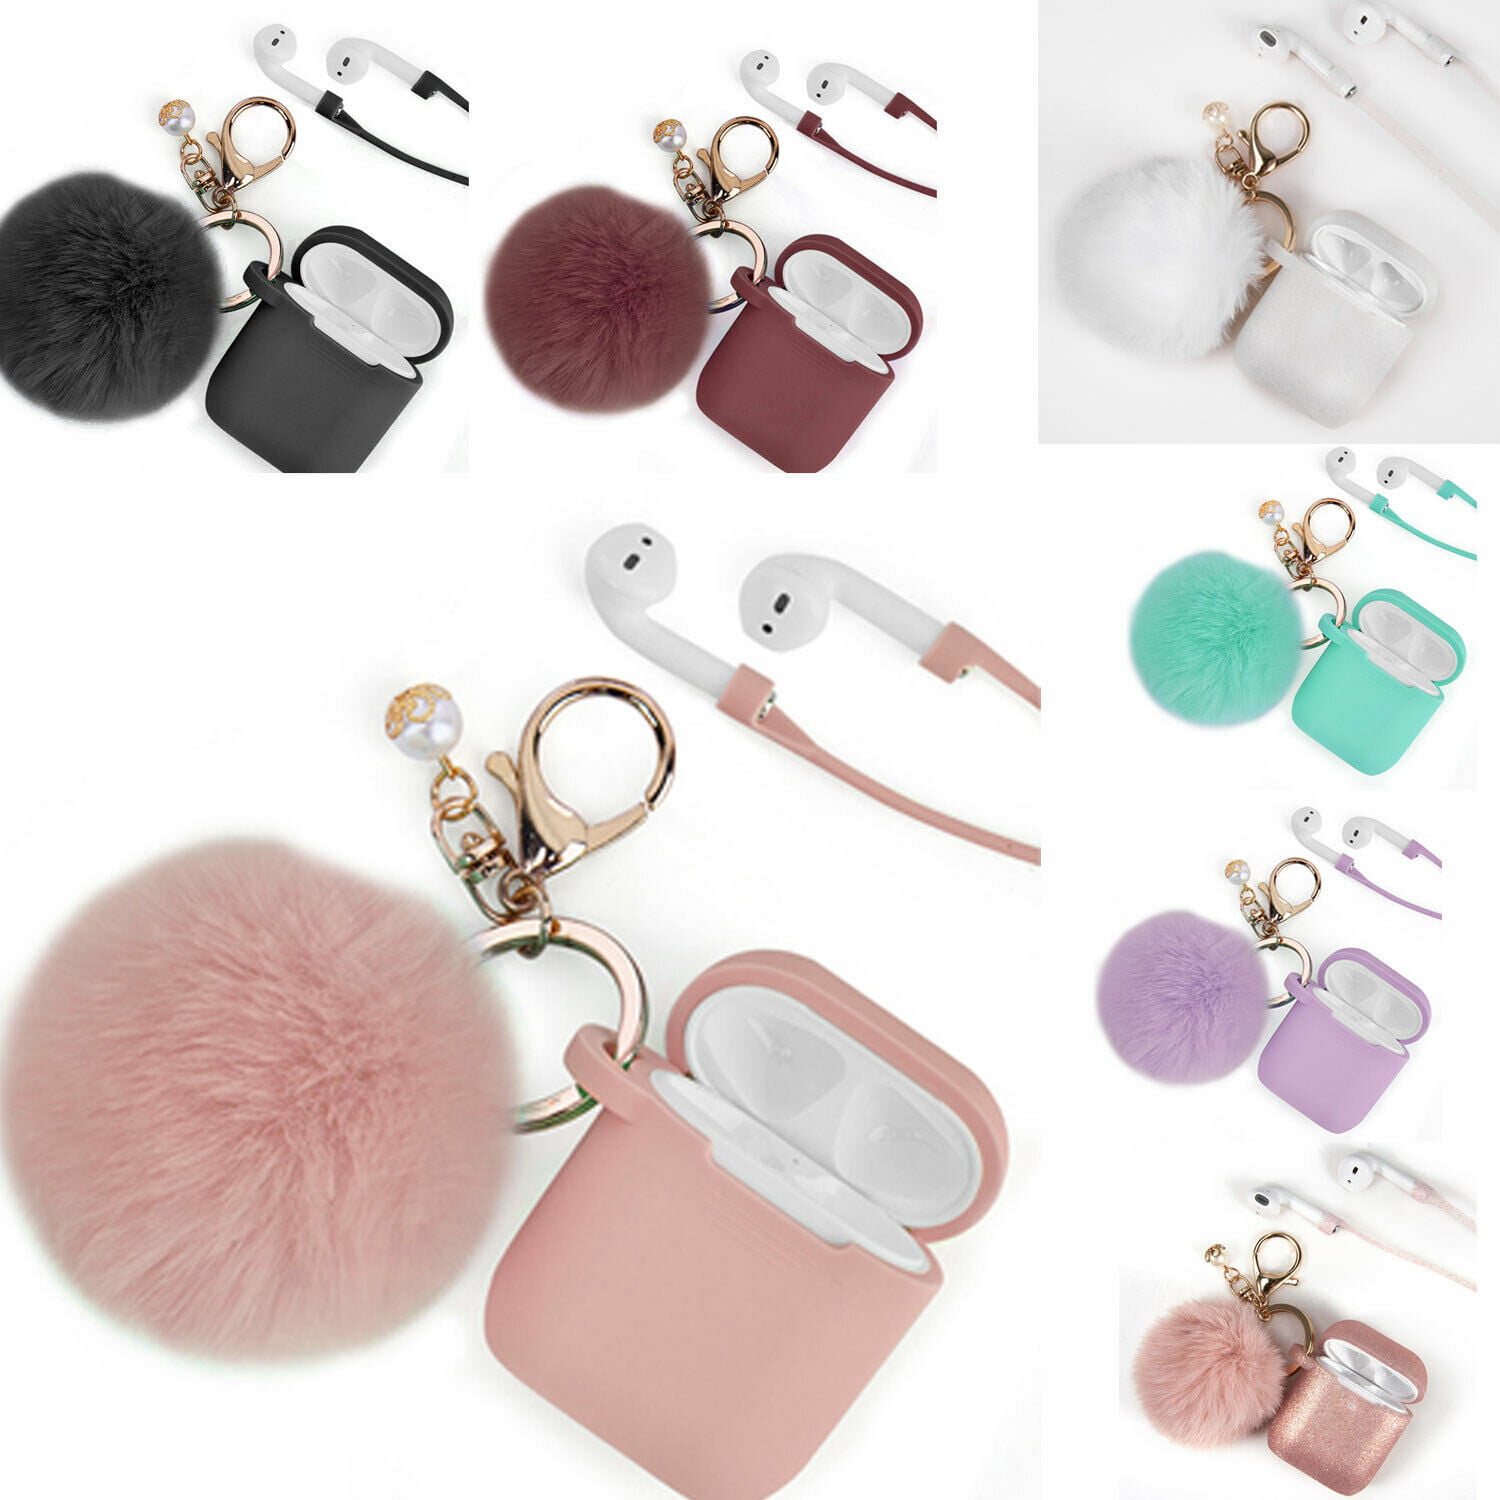 Daisy Airpods Case Cover Cute OTOPO Flower Airpod Cases Protective Hard Cover Portable & Shockproof Women Girls Men with Heart-Shaped Keychain for Airpods 2/1 Charging Case 